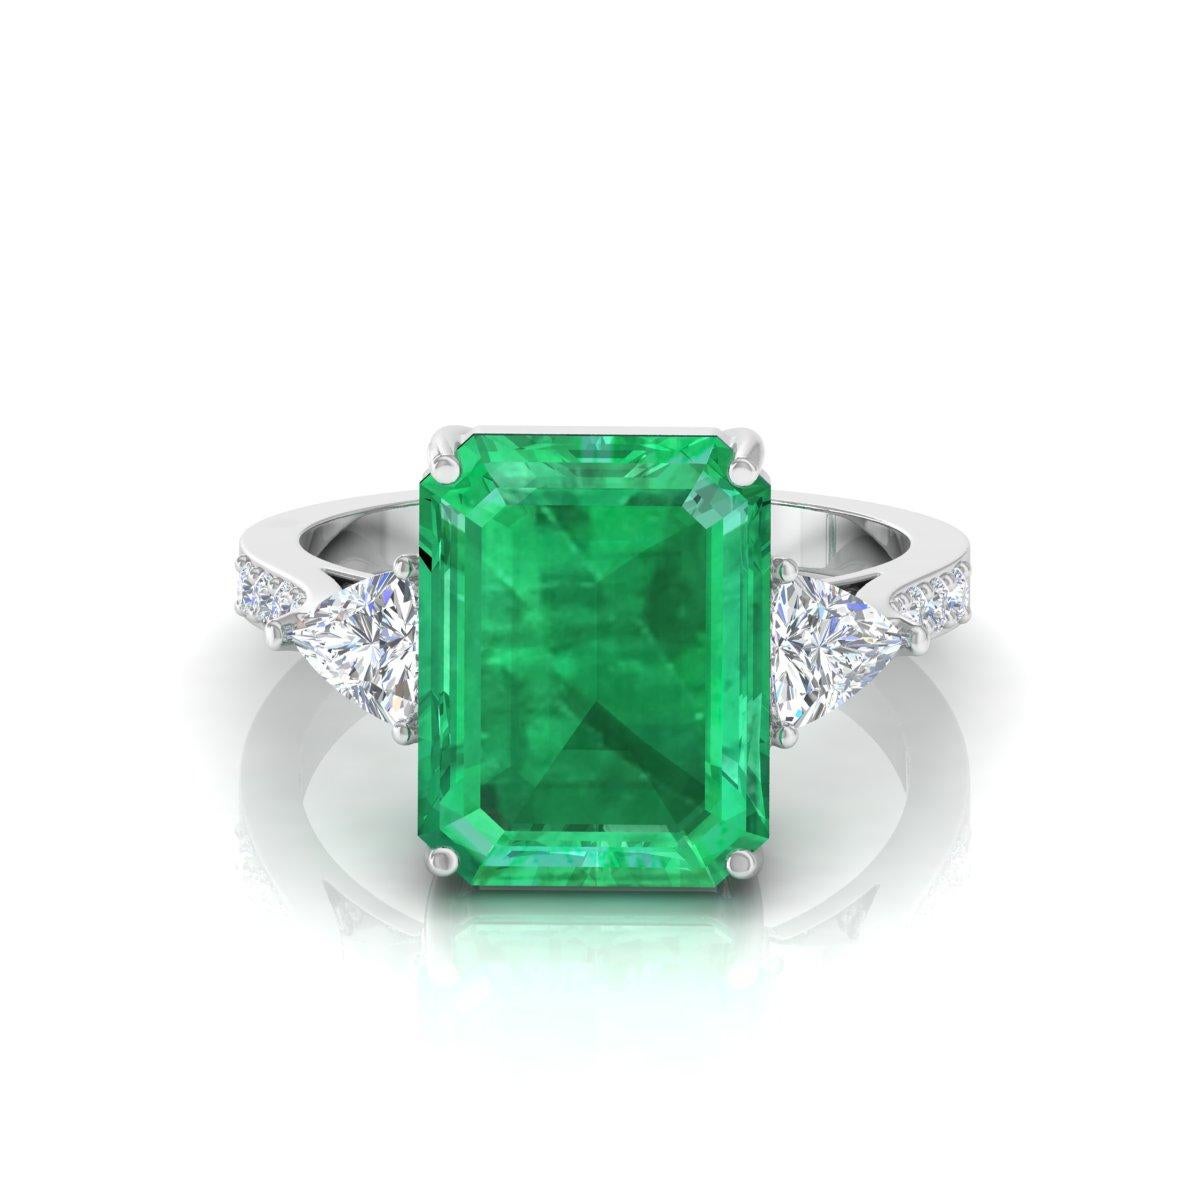 For Sale:  Natural Emerald Gemstone Ring Trillion Cut Diamond Solid 18k White Gold Jewelry 3